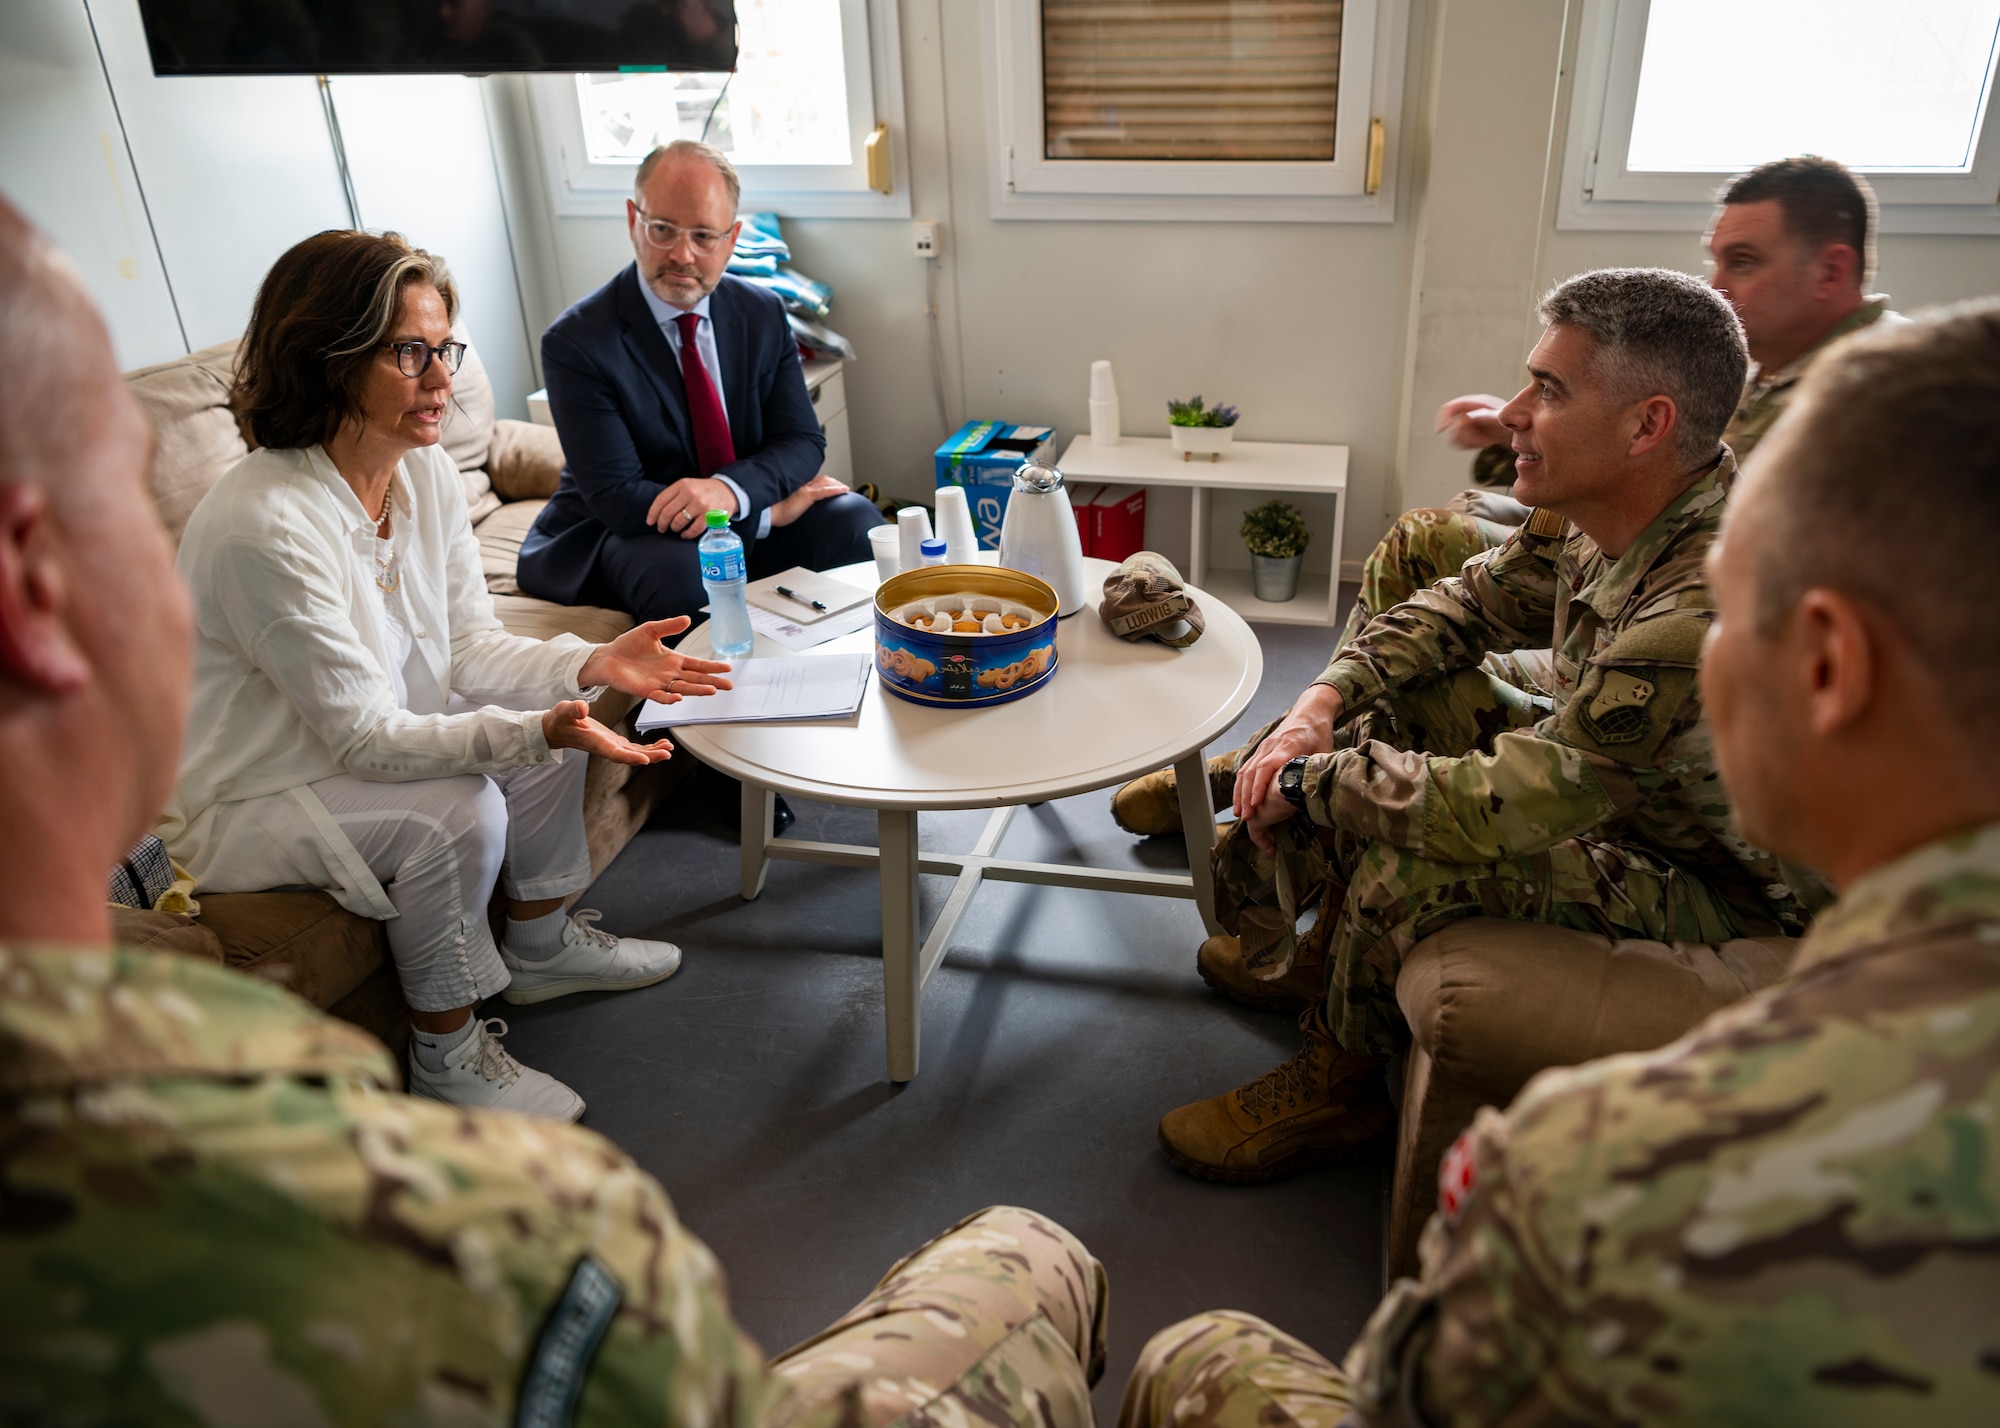 Liselotte Plesner, Ambassador of Denmark, talks with U.S. Air Force Col. George Buch, 386th Air Expeditionary Wing commander, and Chief Master Sgt. Louis Ludwig, 386th AEW command chief during a visit at Ali Al Salem Air Base, Kuwait, May 31, 2023.